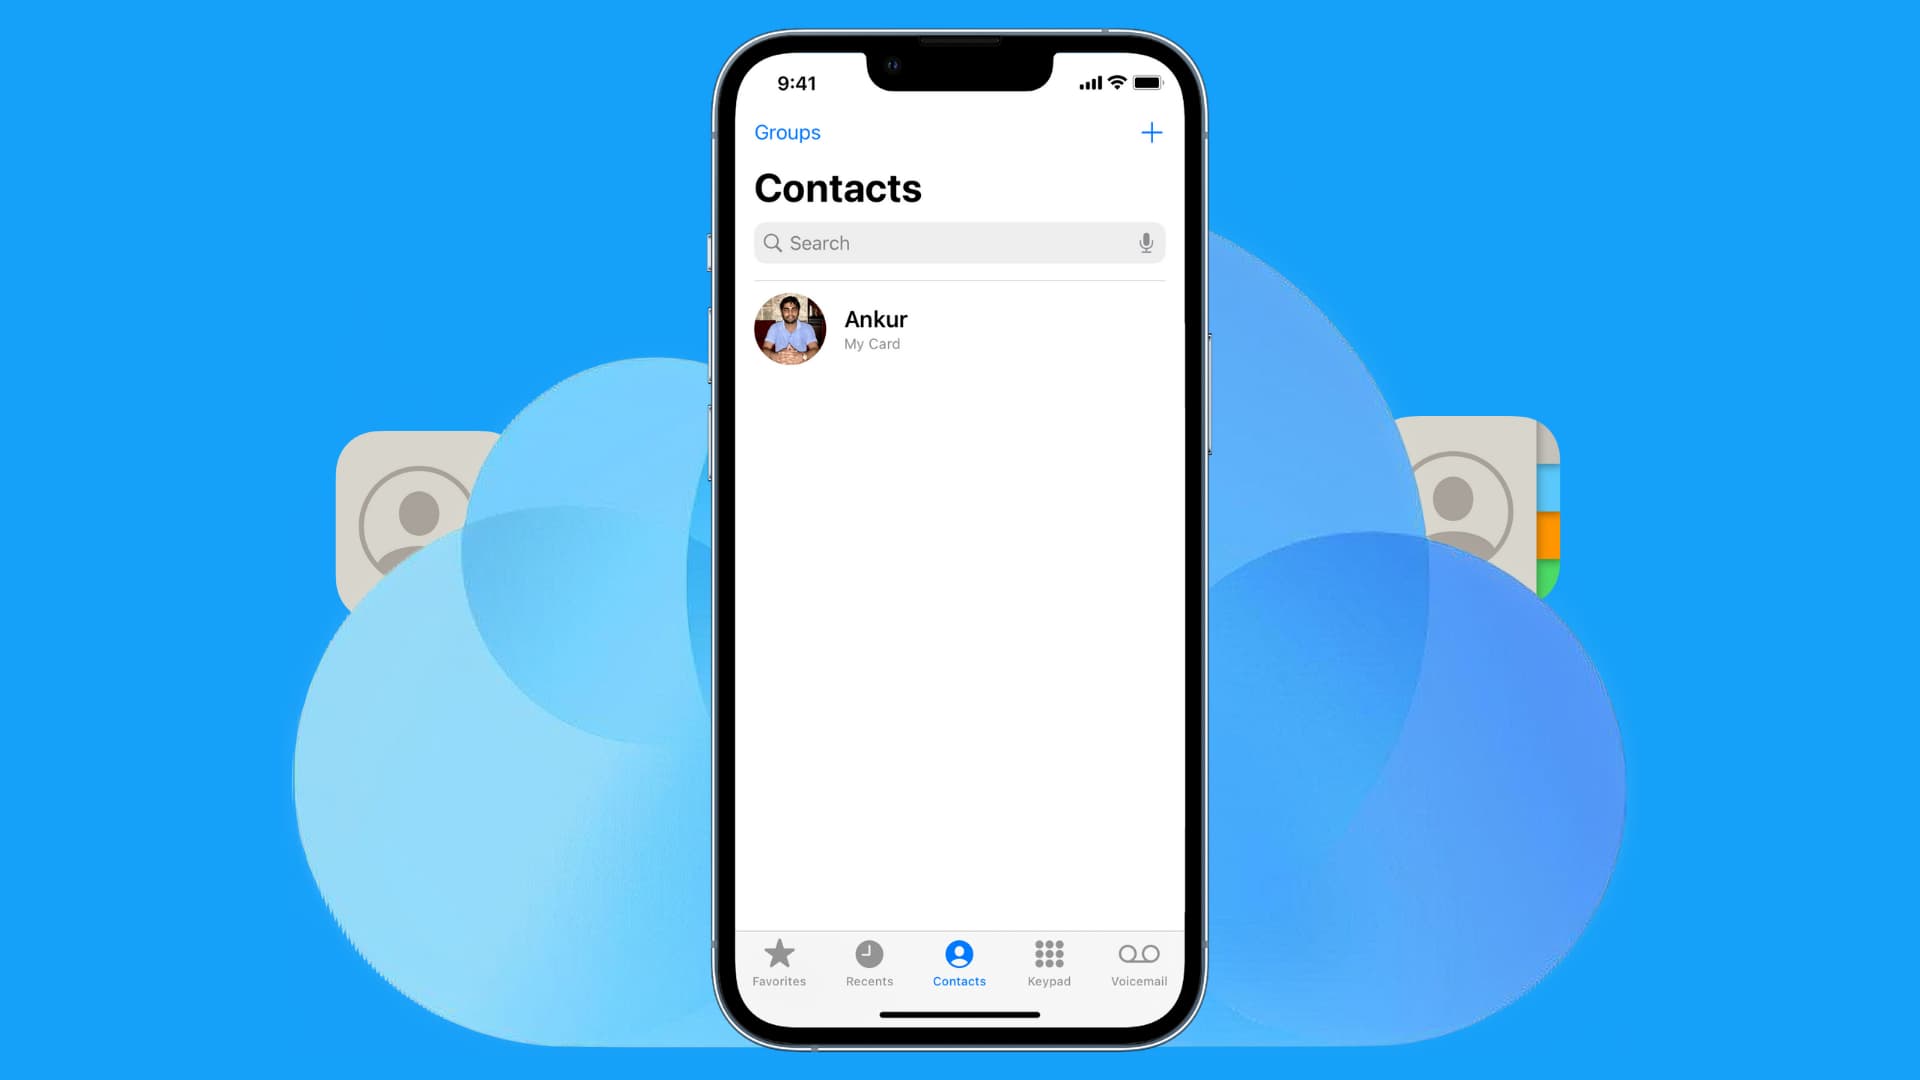 iCloud contacts missing on iPhone? Here are 8 solutions to get them back